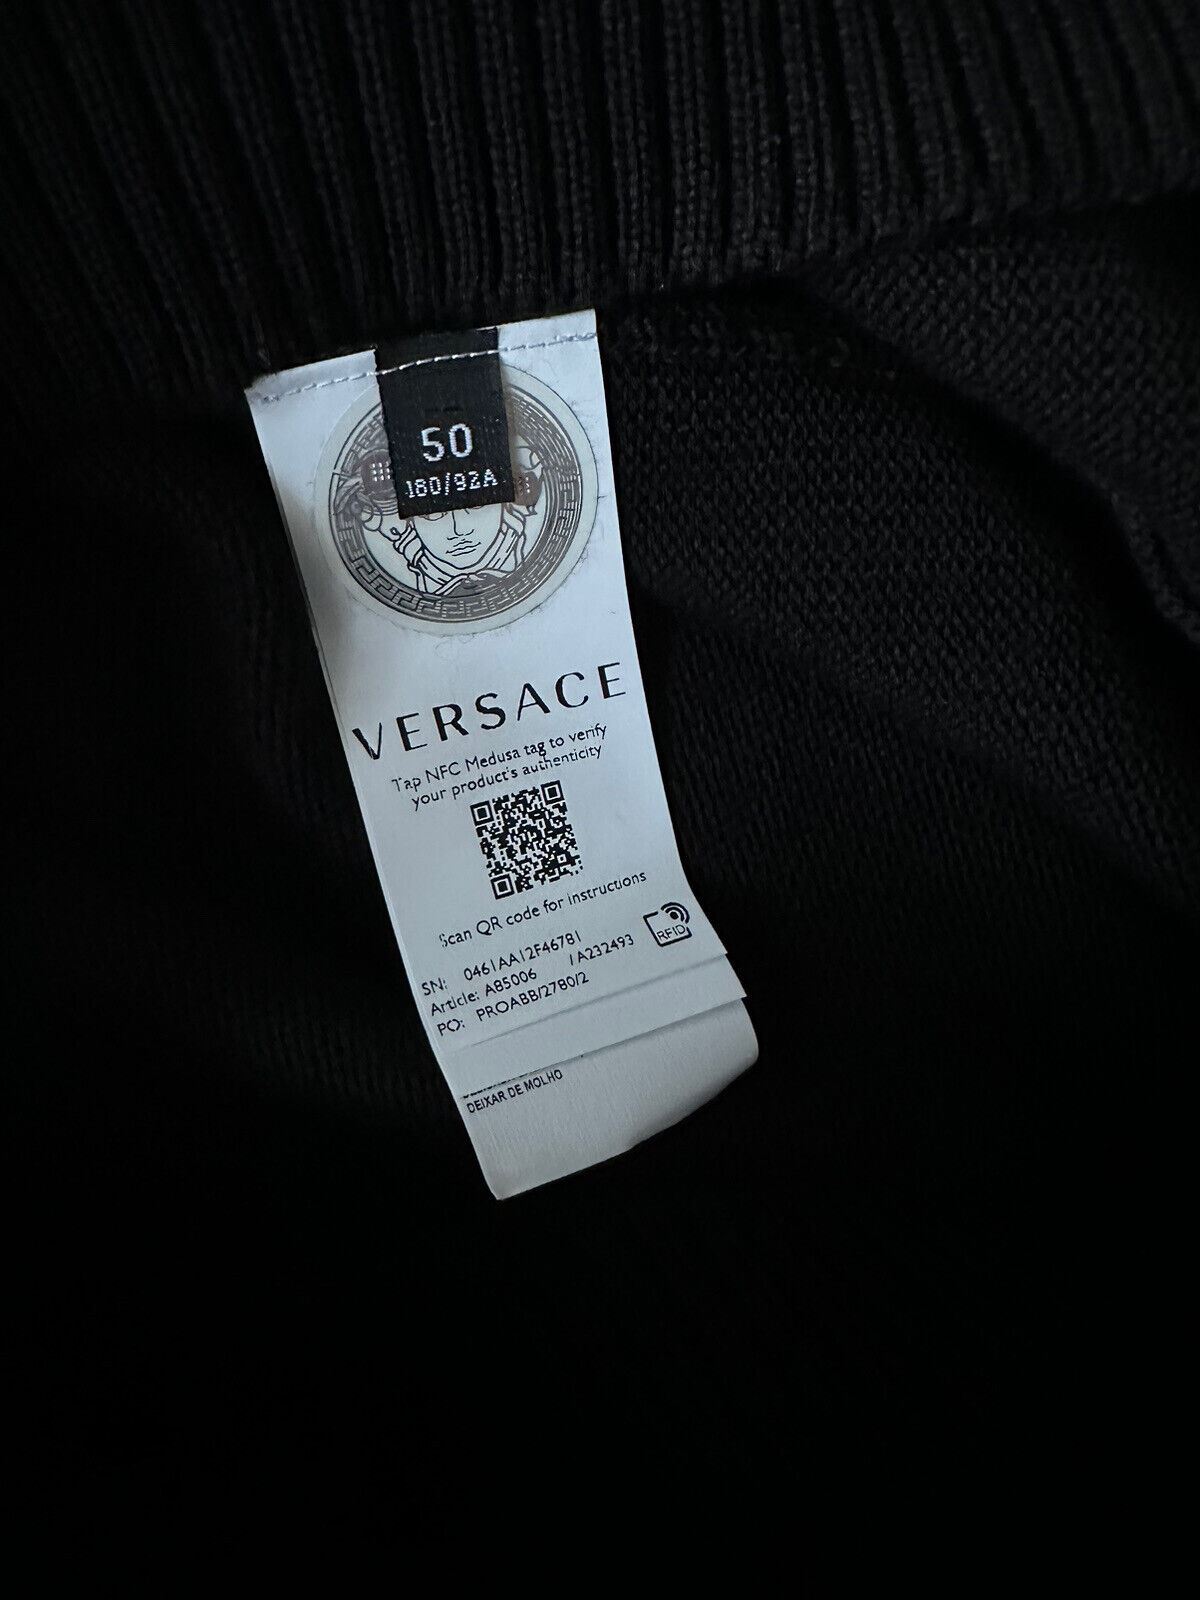 NWT $700 Versace Signature Cotton Knit Sweater Black 50 (Large) Italy A85006